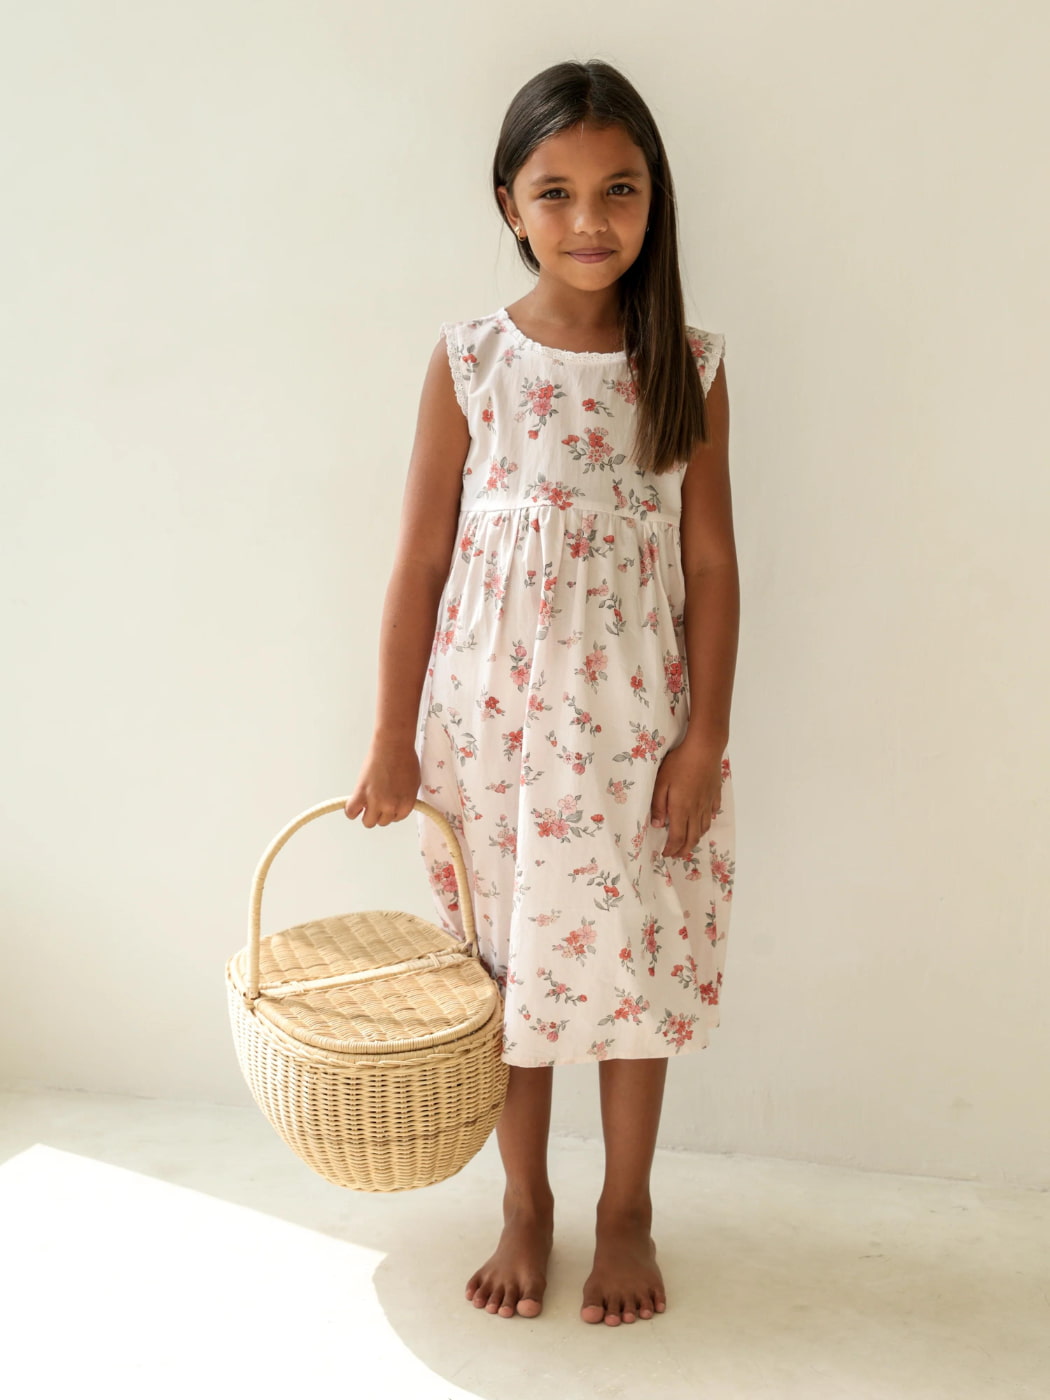 A girl wearing Illoura the label holding a basket